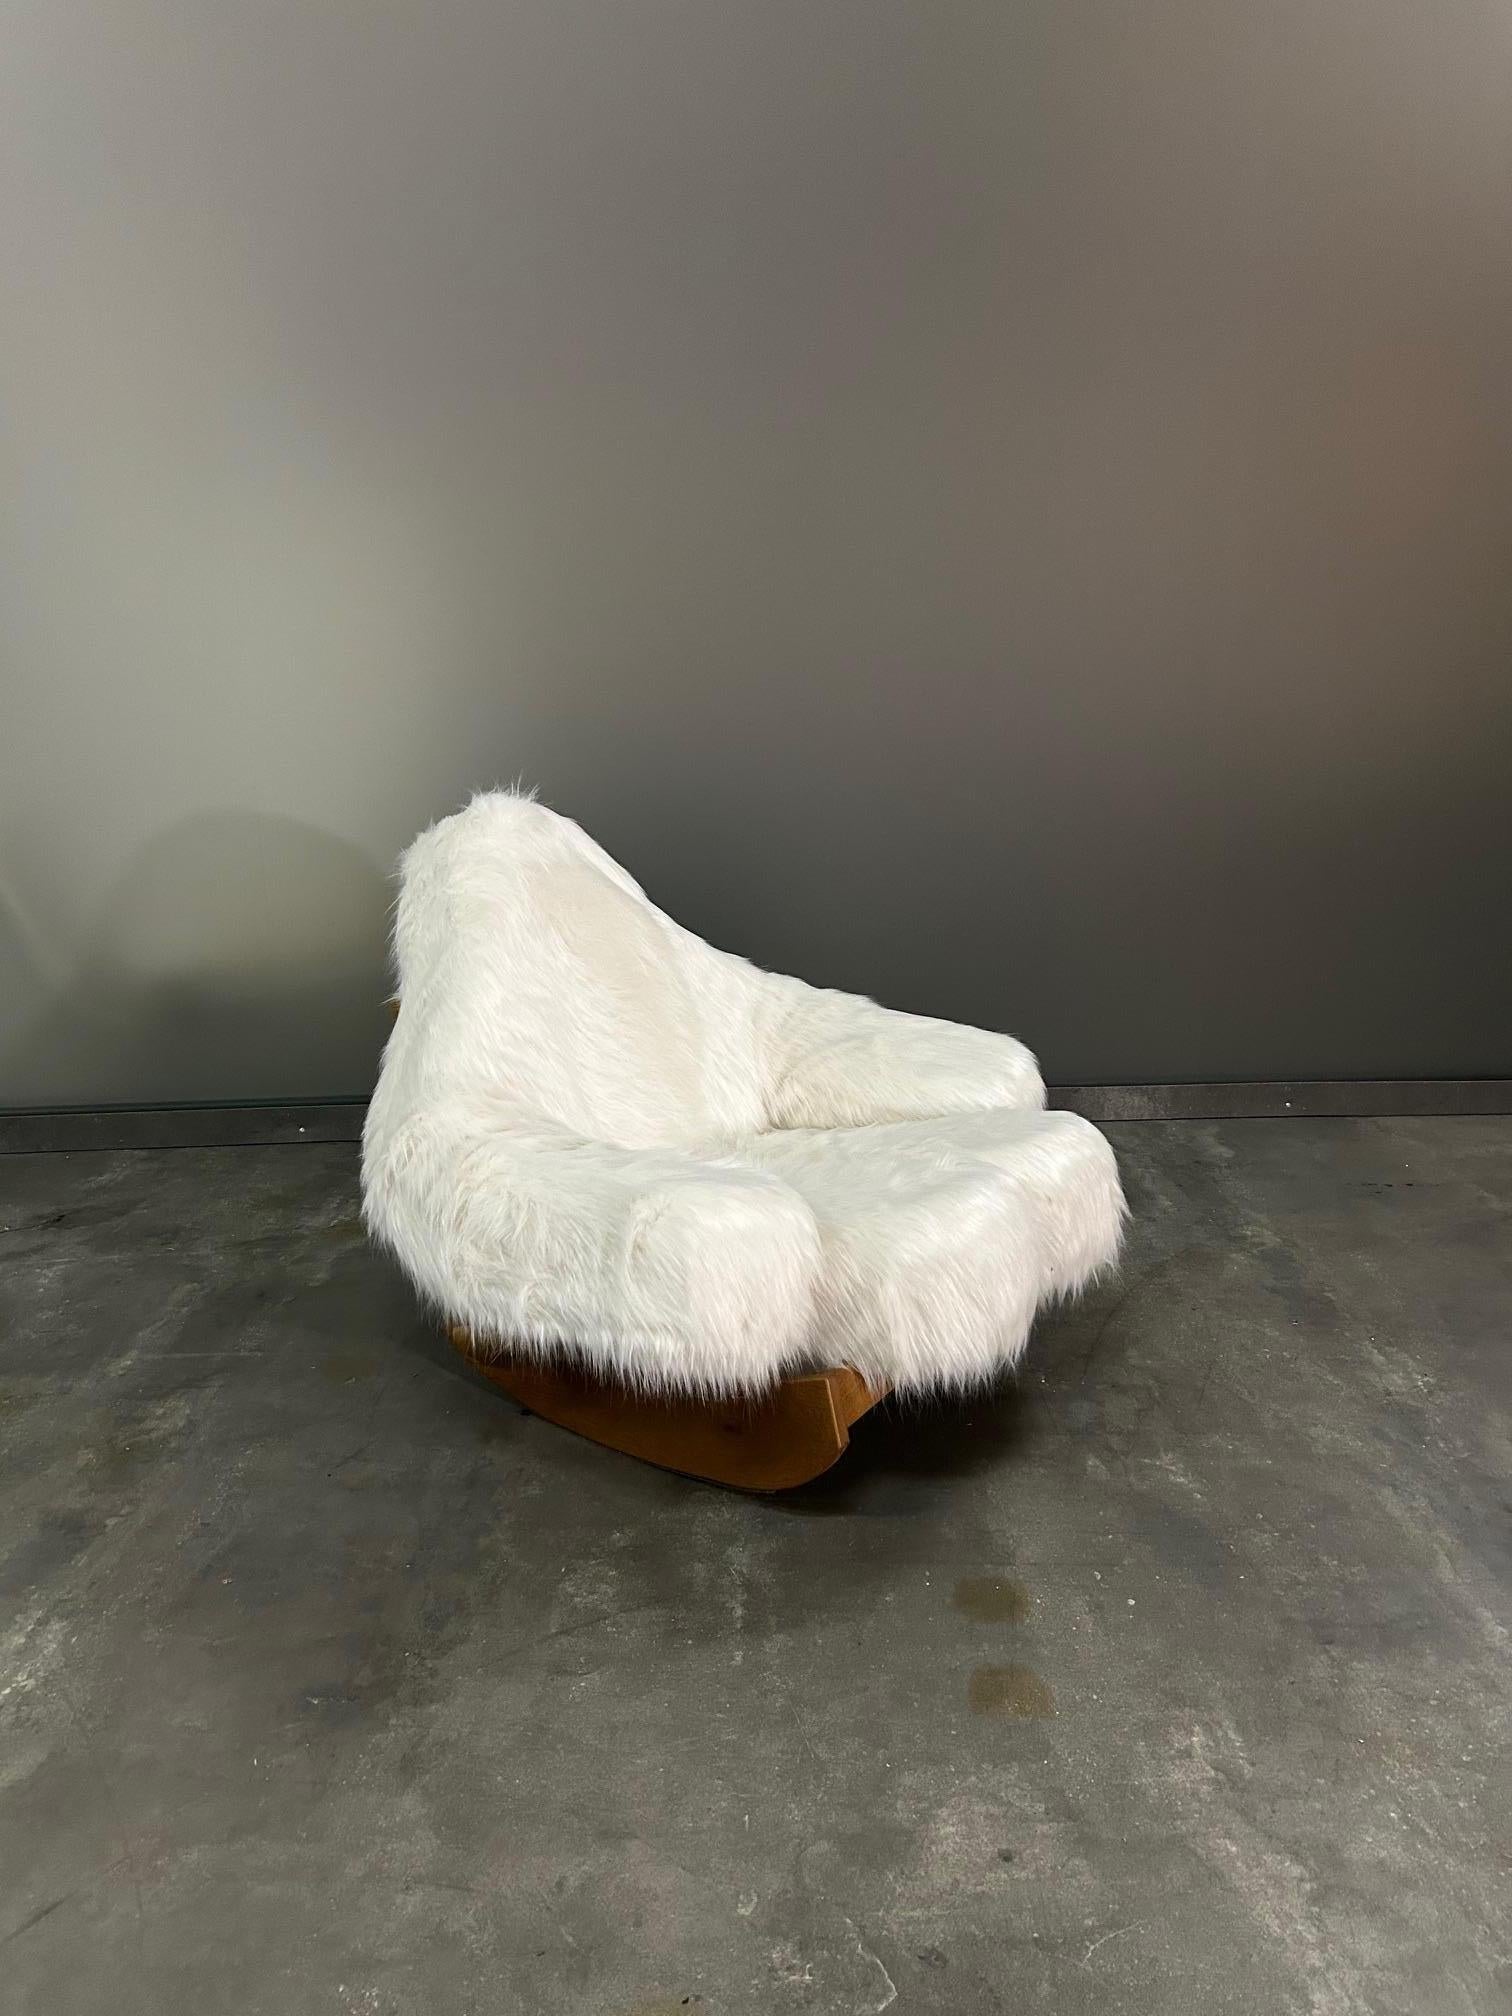 Pop Art iconic Mario Scheichenbauer “Yeti” rocking chair for Elam, Italy. 1970s.
Stained oak basket structure, anthropomorphic cushion covered with long haired wolf faux fur. Perfect conditions.